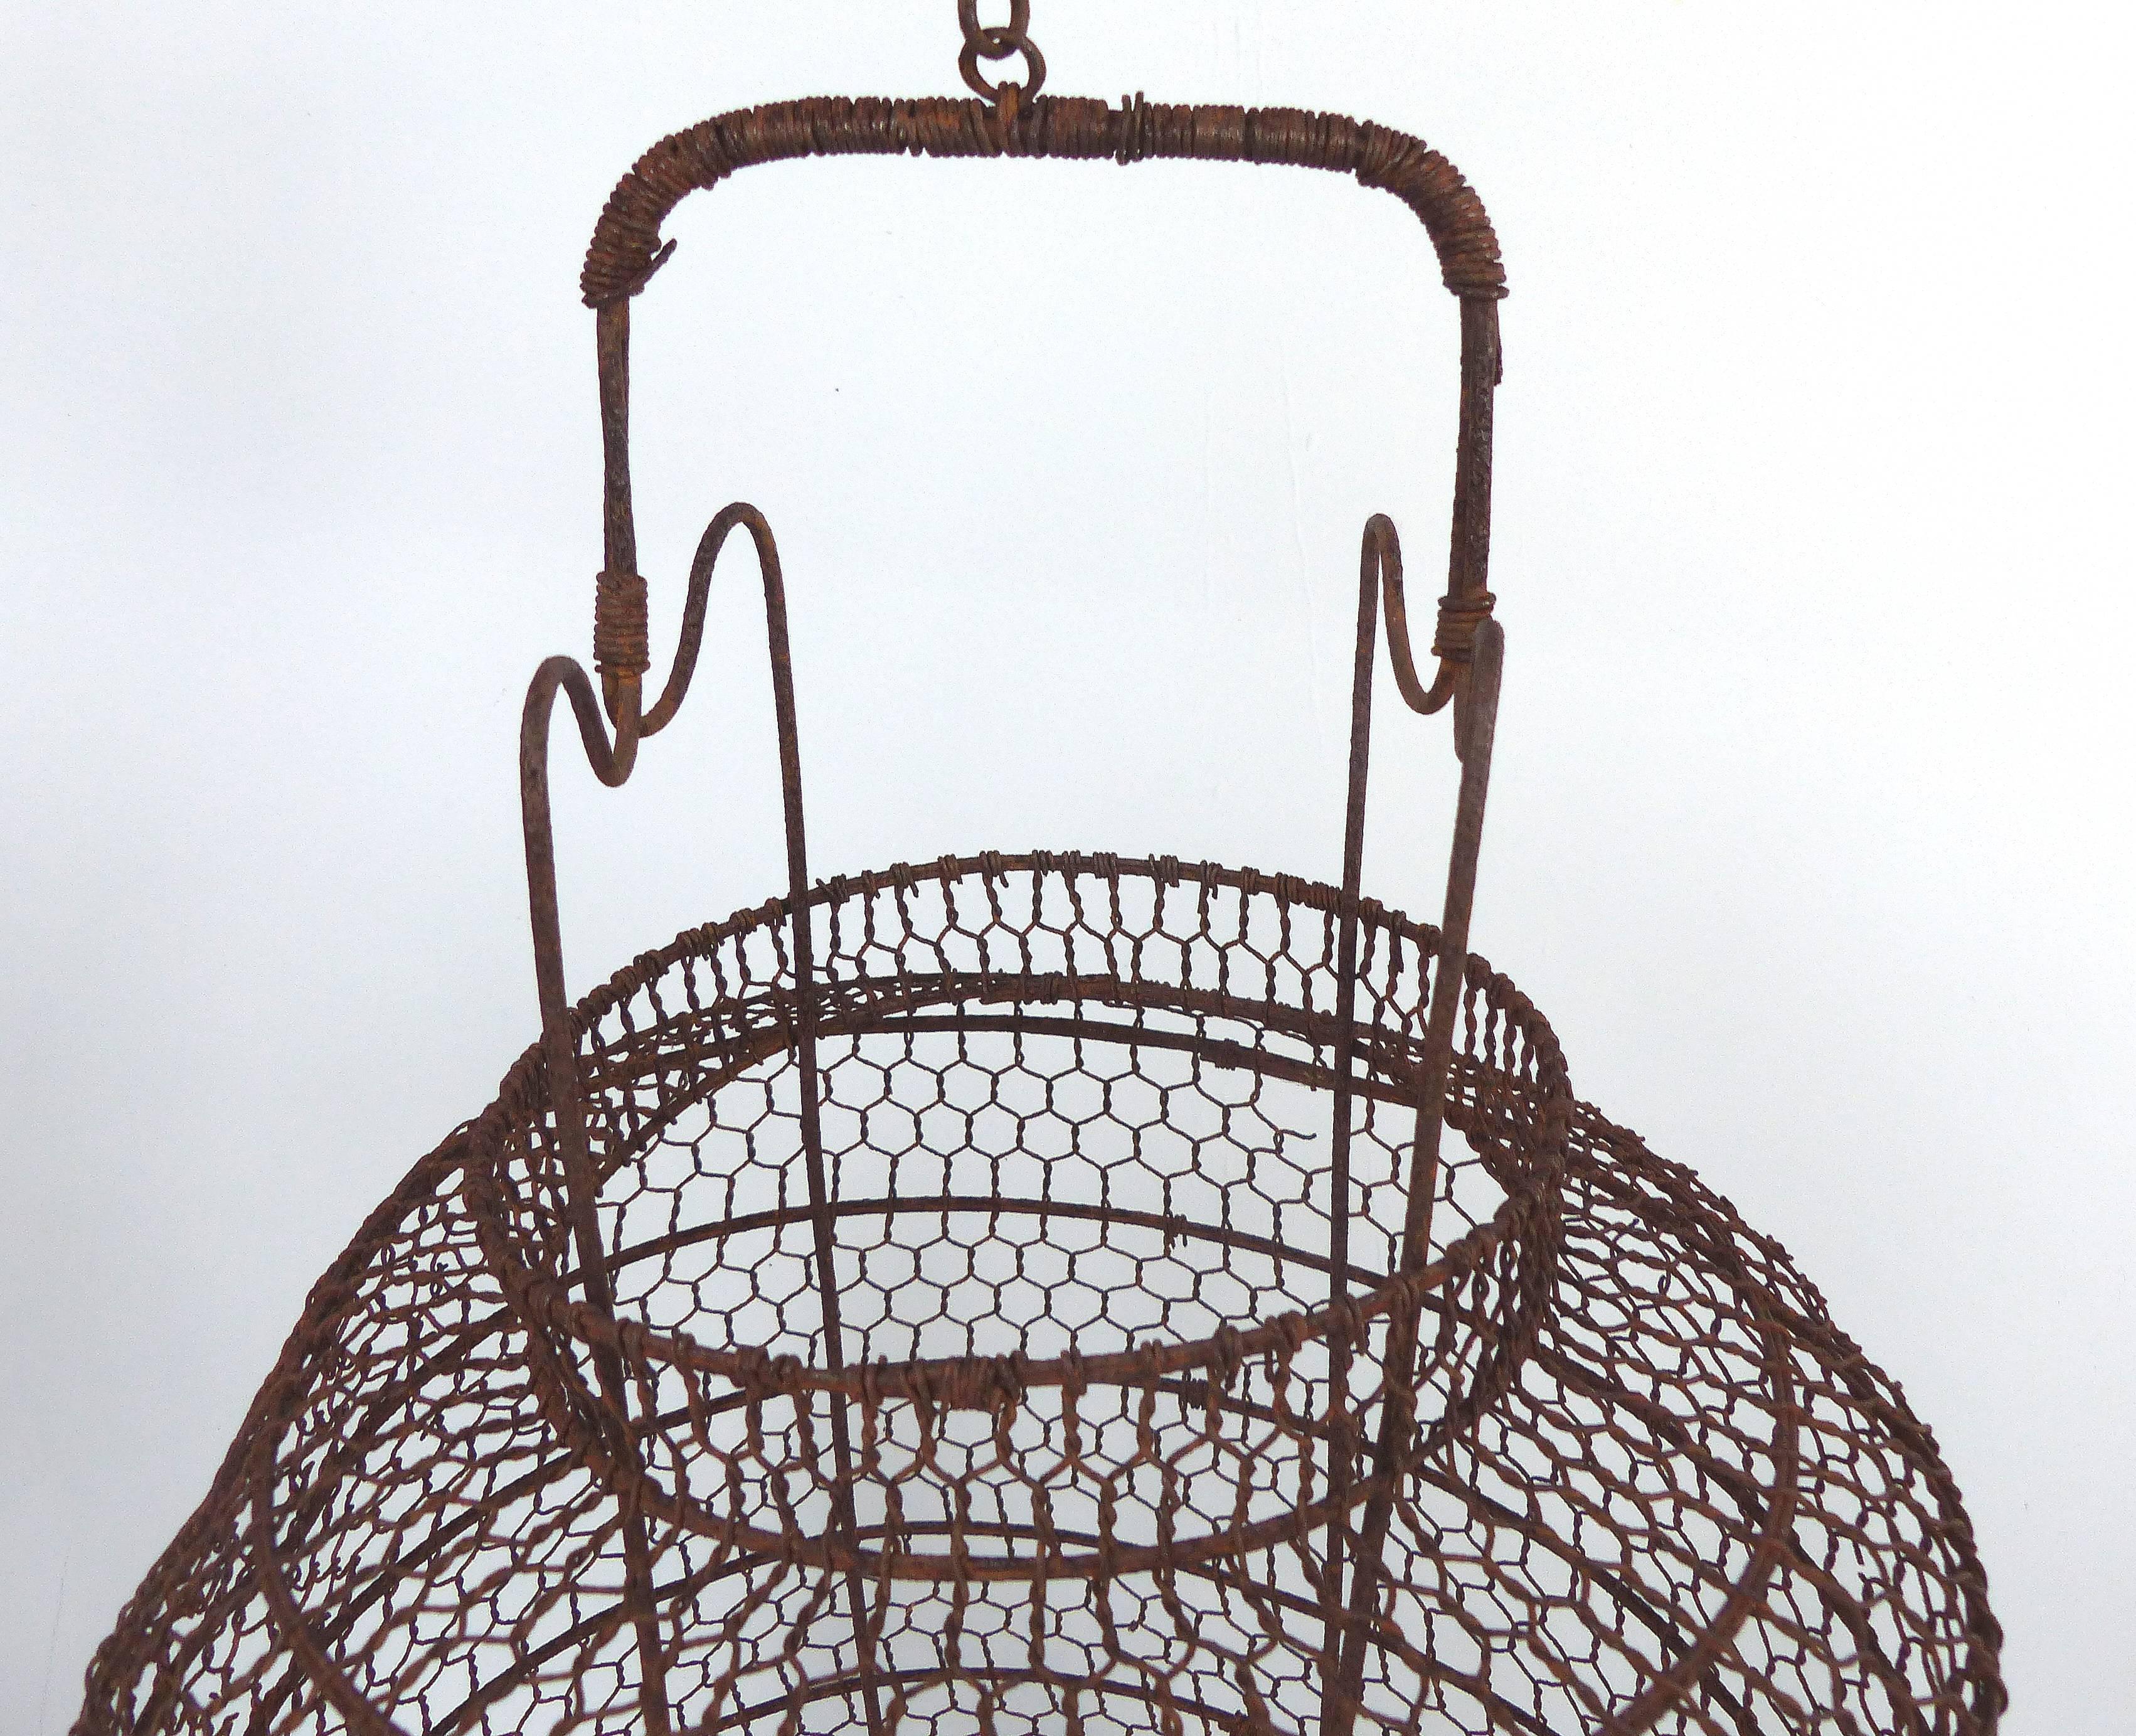 Offered for sale is a Chinese 19th century twisted wire candle lantern frame with the hanger and wood base. The frame shows corrosion from age and has some unevenness to the top side. Originally, the lantern would have had an interior fabric or